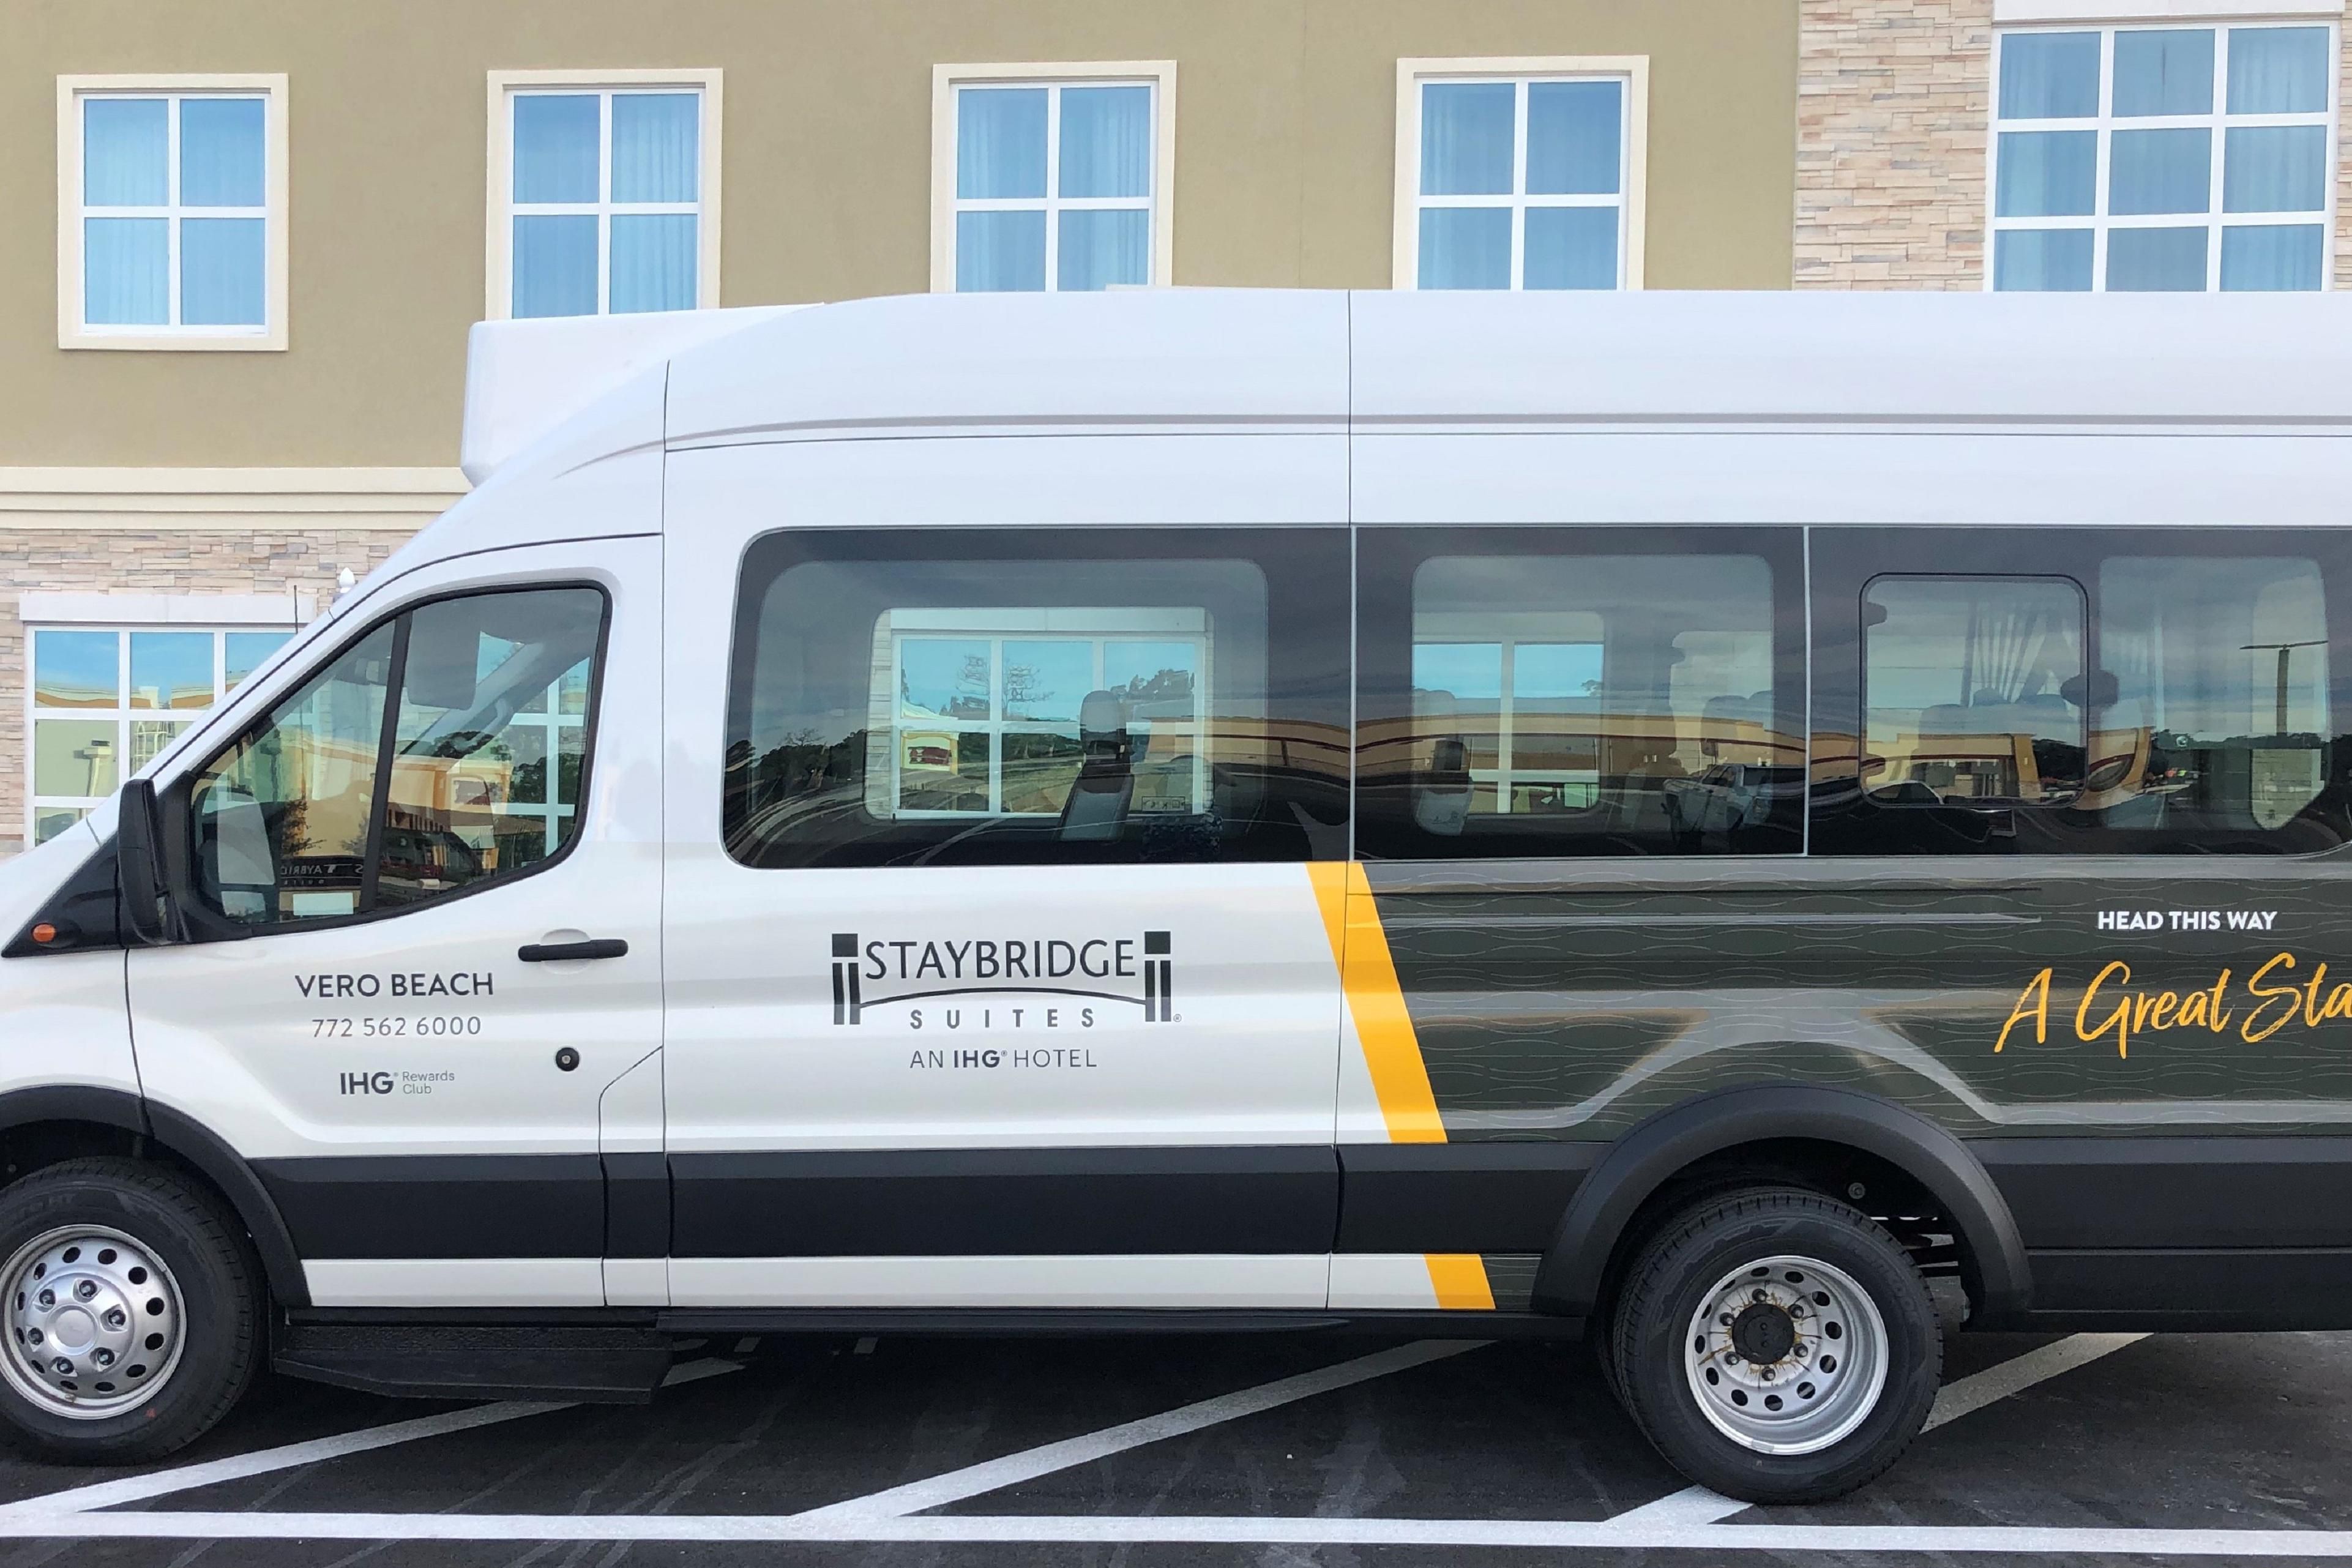 Need a lift? Take a ride on our complimentary hotel shuttle, available 7 days a week. The shuttle operates within a 6 mile radius of the hotel and includes the beach, local breweries, the Vero Beach airport, and the Vero Beach Outlet Mall.  